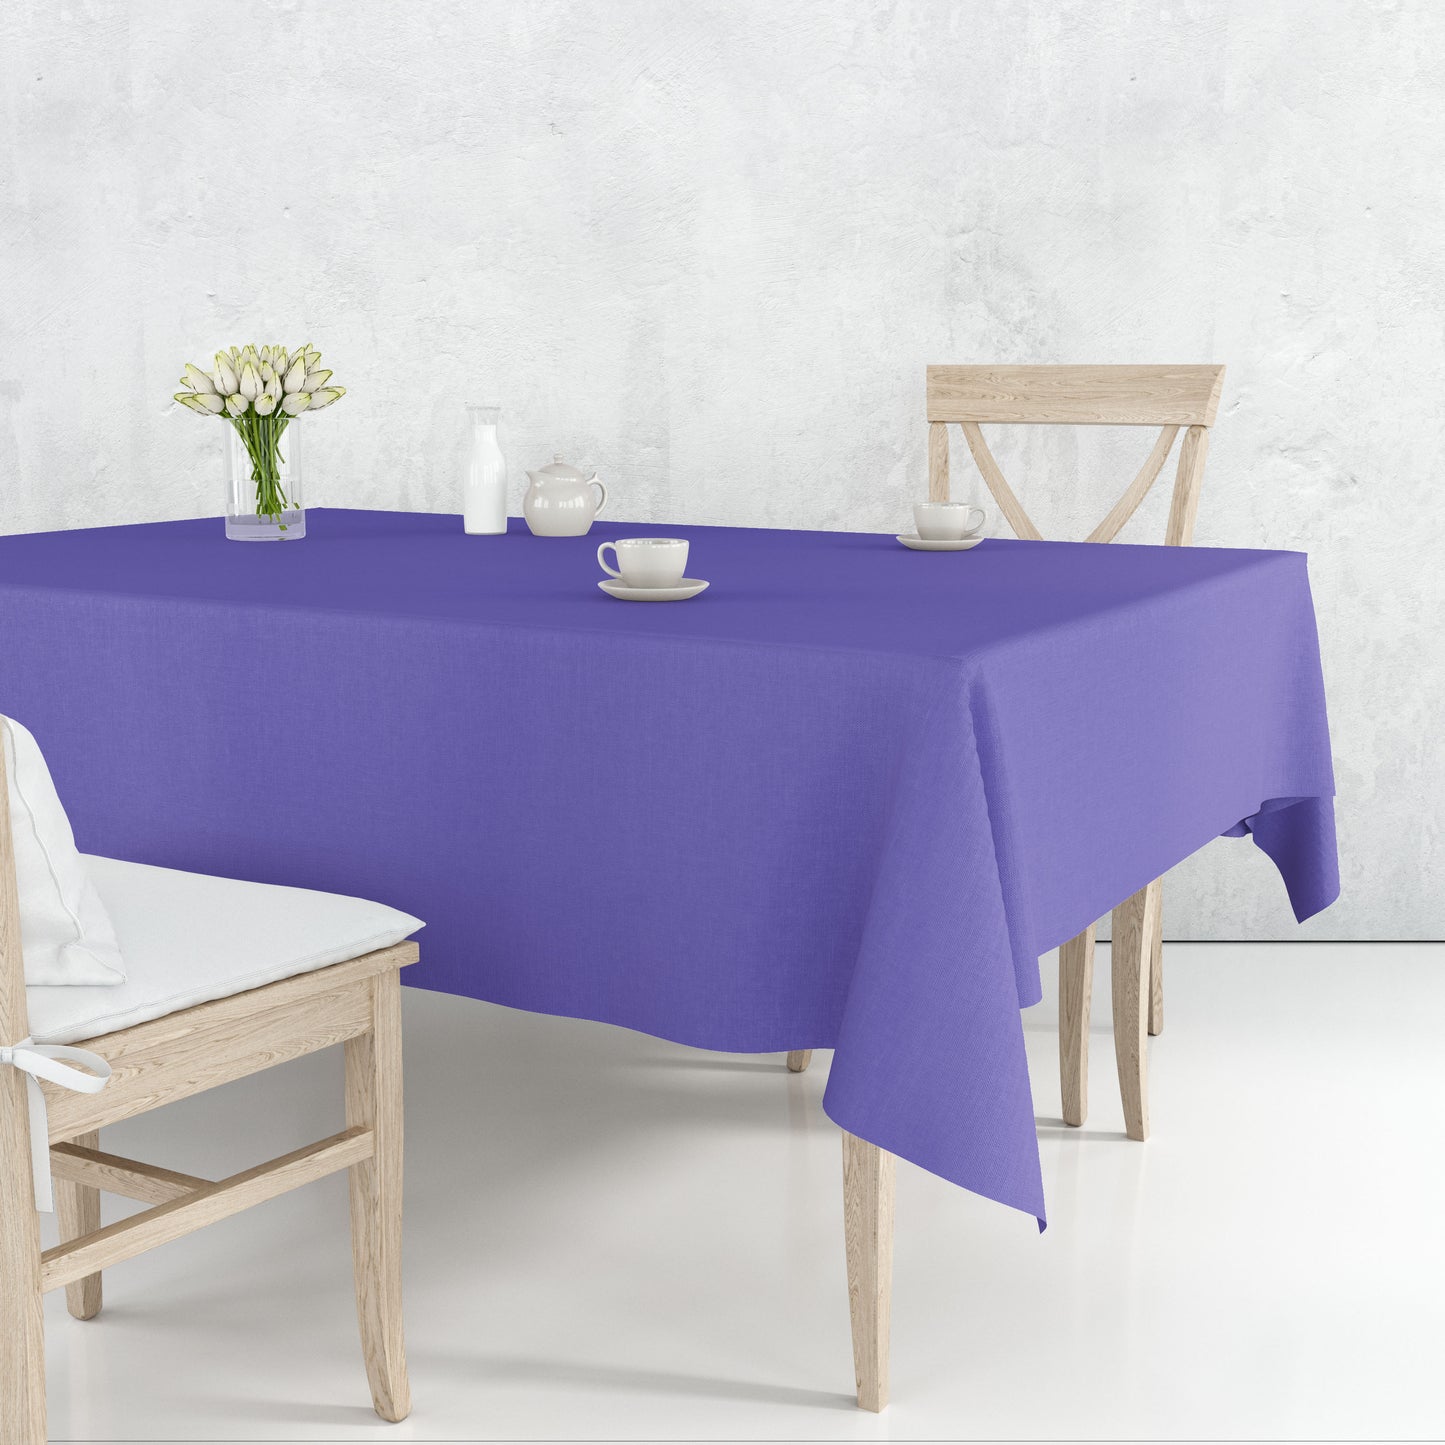 Tablecover Plastic Purple Rectangular  54'' X 108'' Tablesettings Party Dimensions   